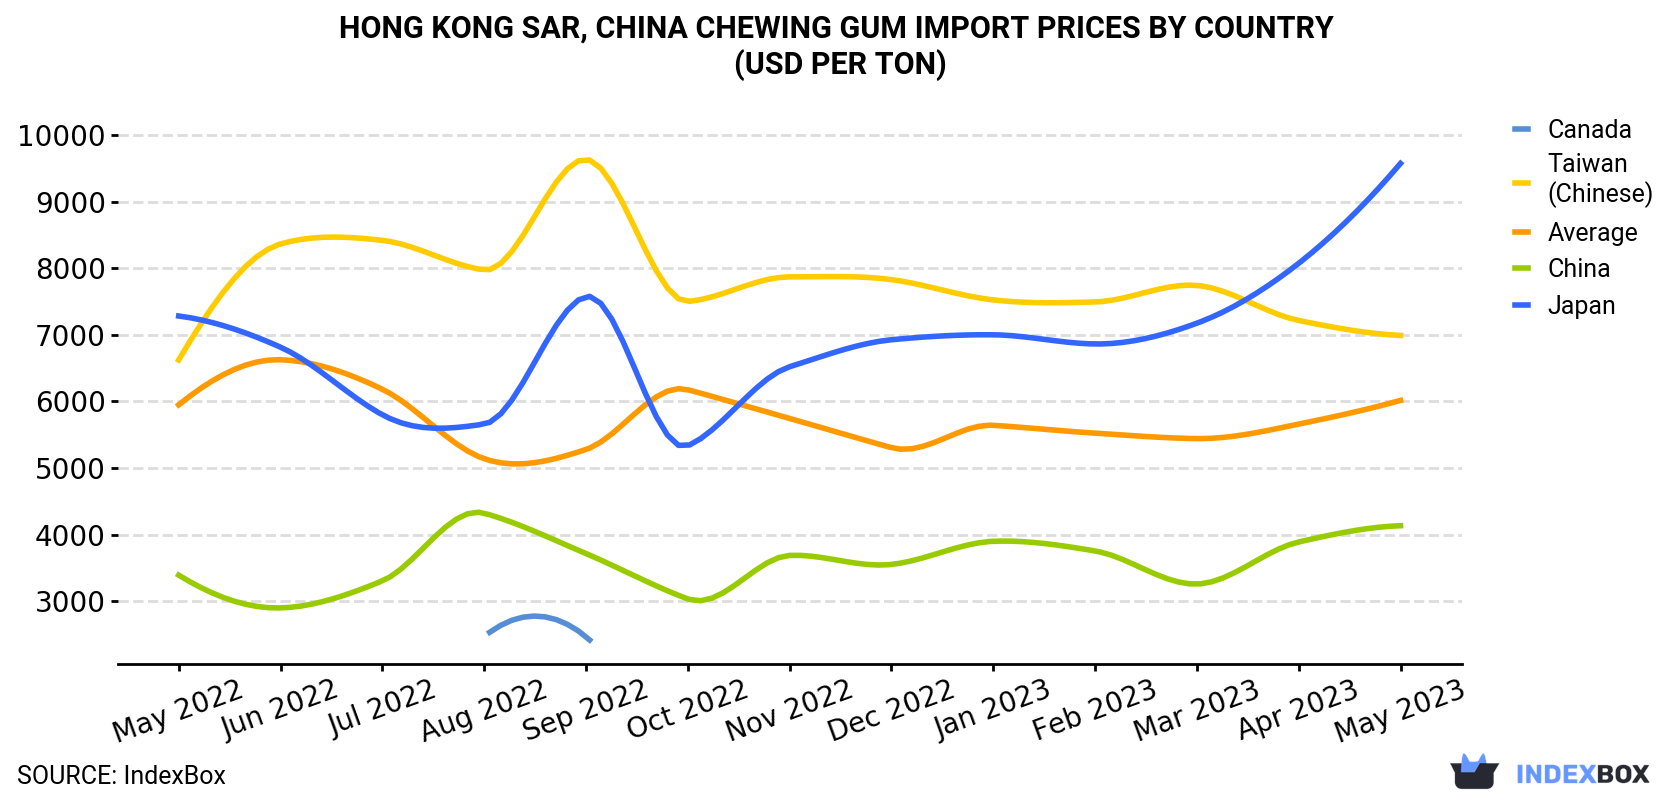 Hong Kong Chewing Gum Import Prices By Country (USD Per Ton)